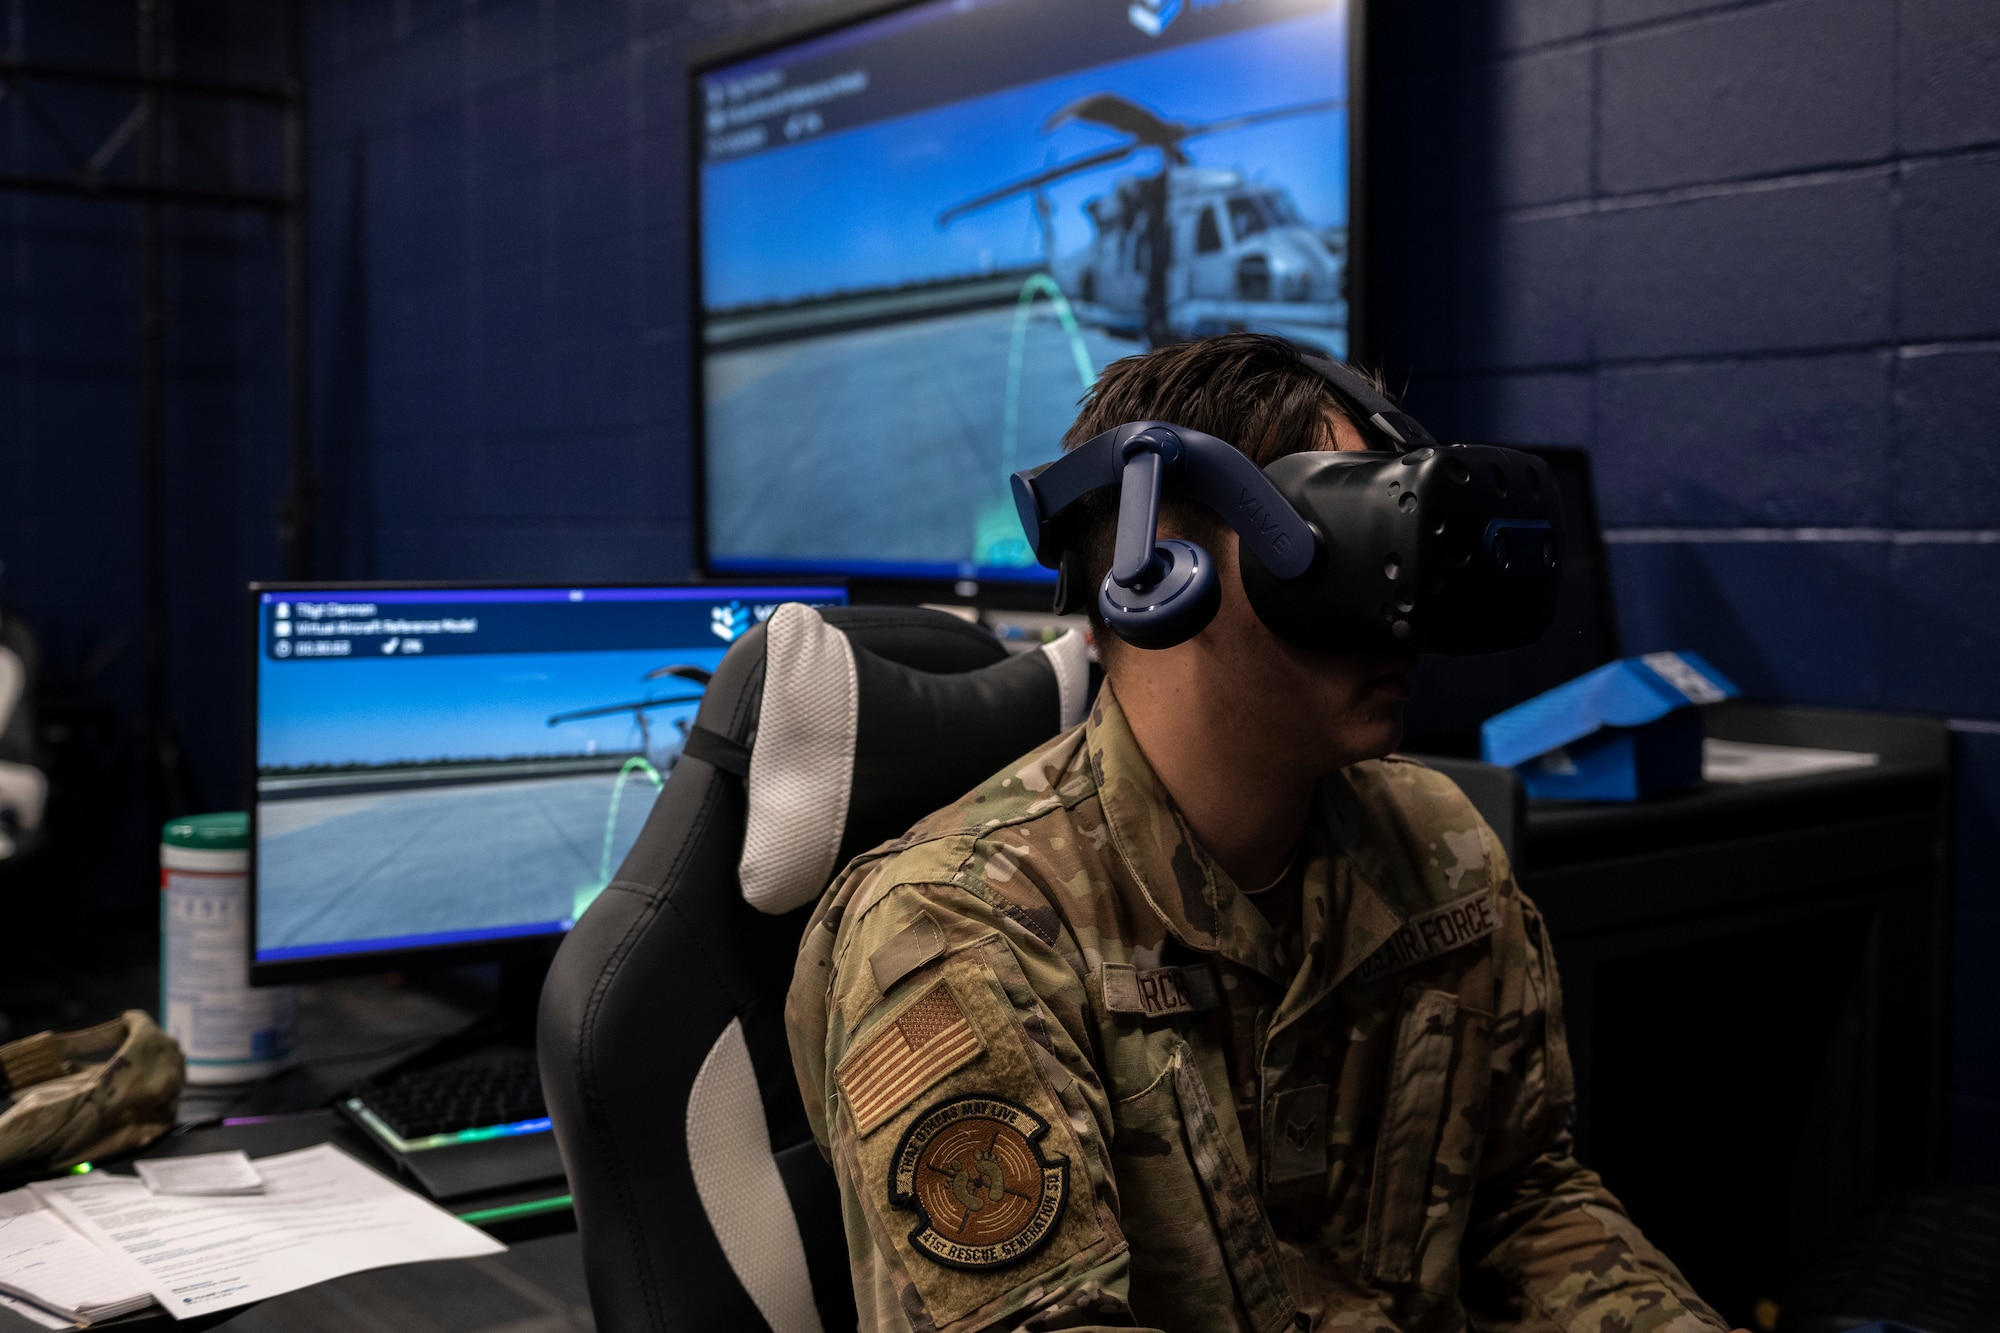 A photo on an Airman sitting in a chair with a VR headset on.